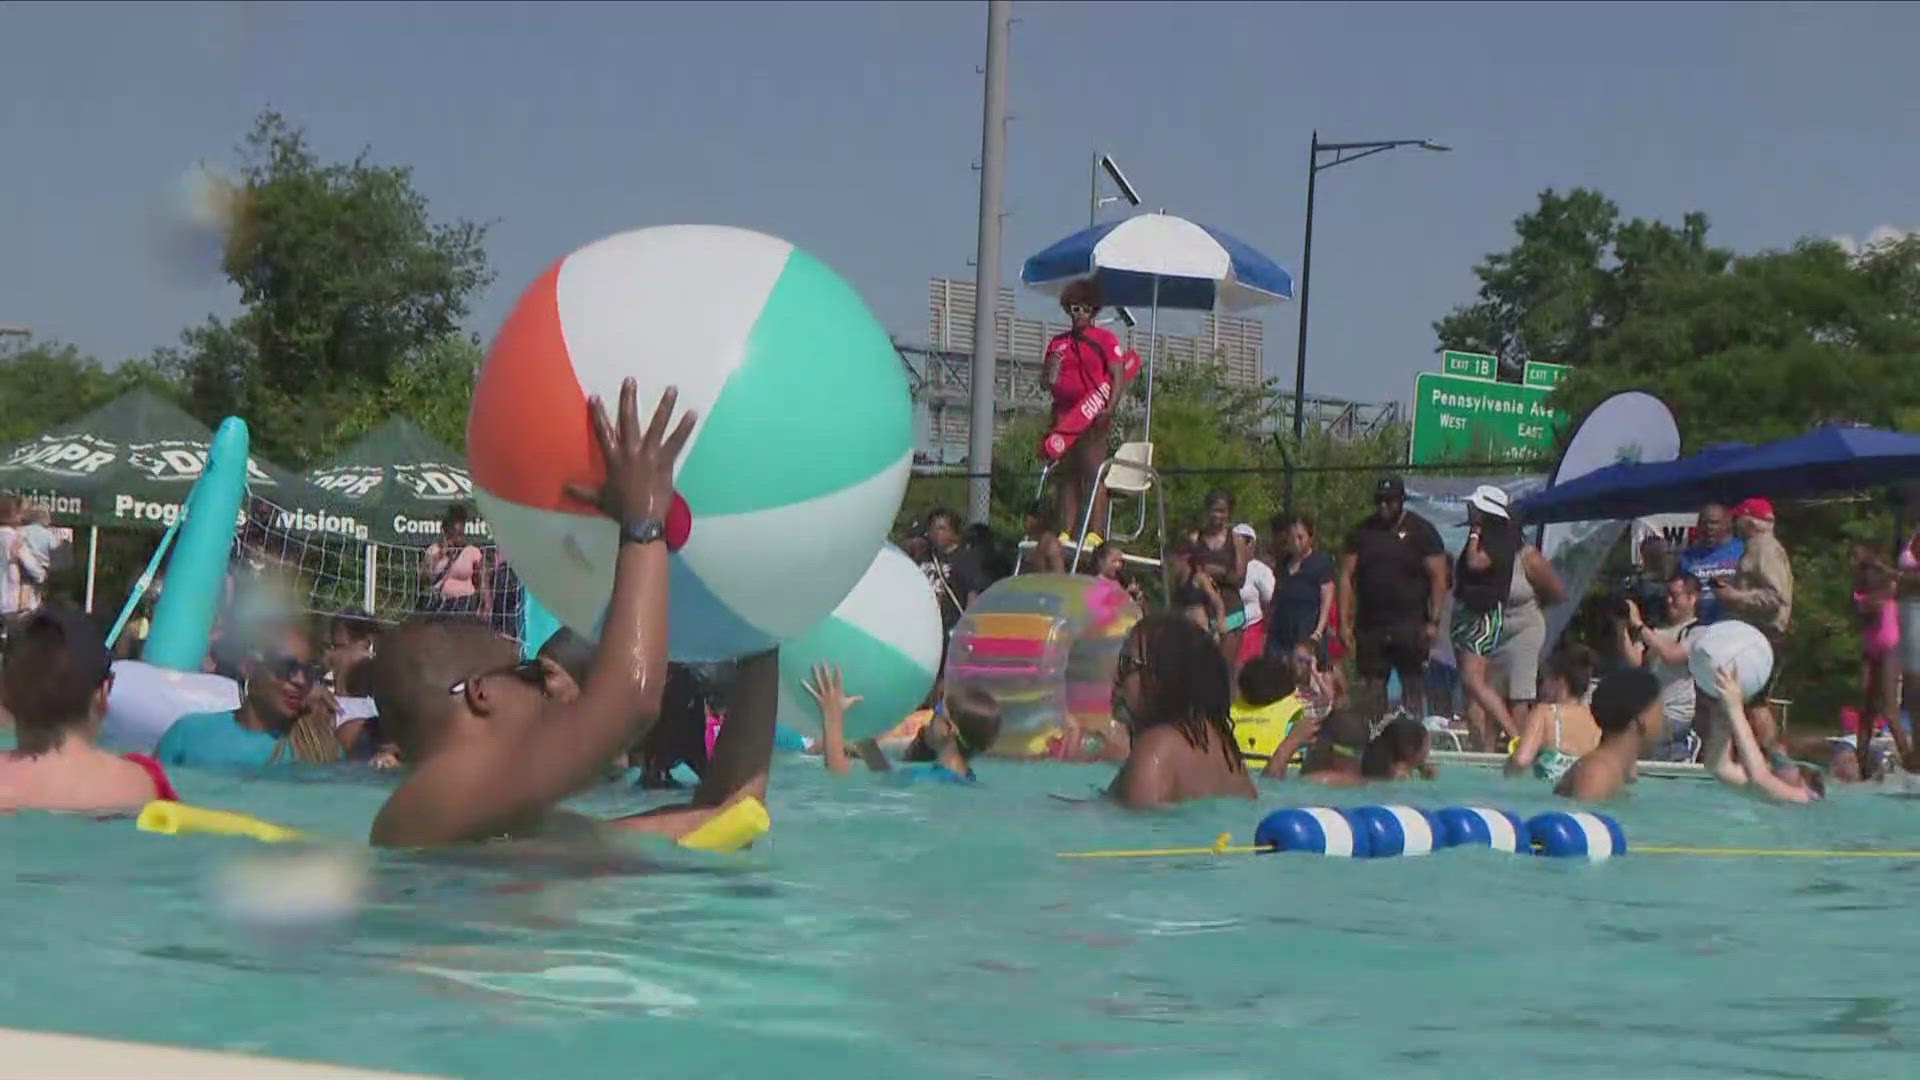 DC MAYOR MURIEL BOWSER OFFICIALLY OPENED THE CITY POOLS BY JUMPING INTO THE ANACOSTIA POOL.